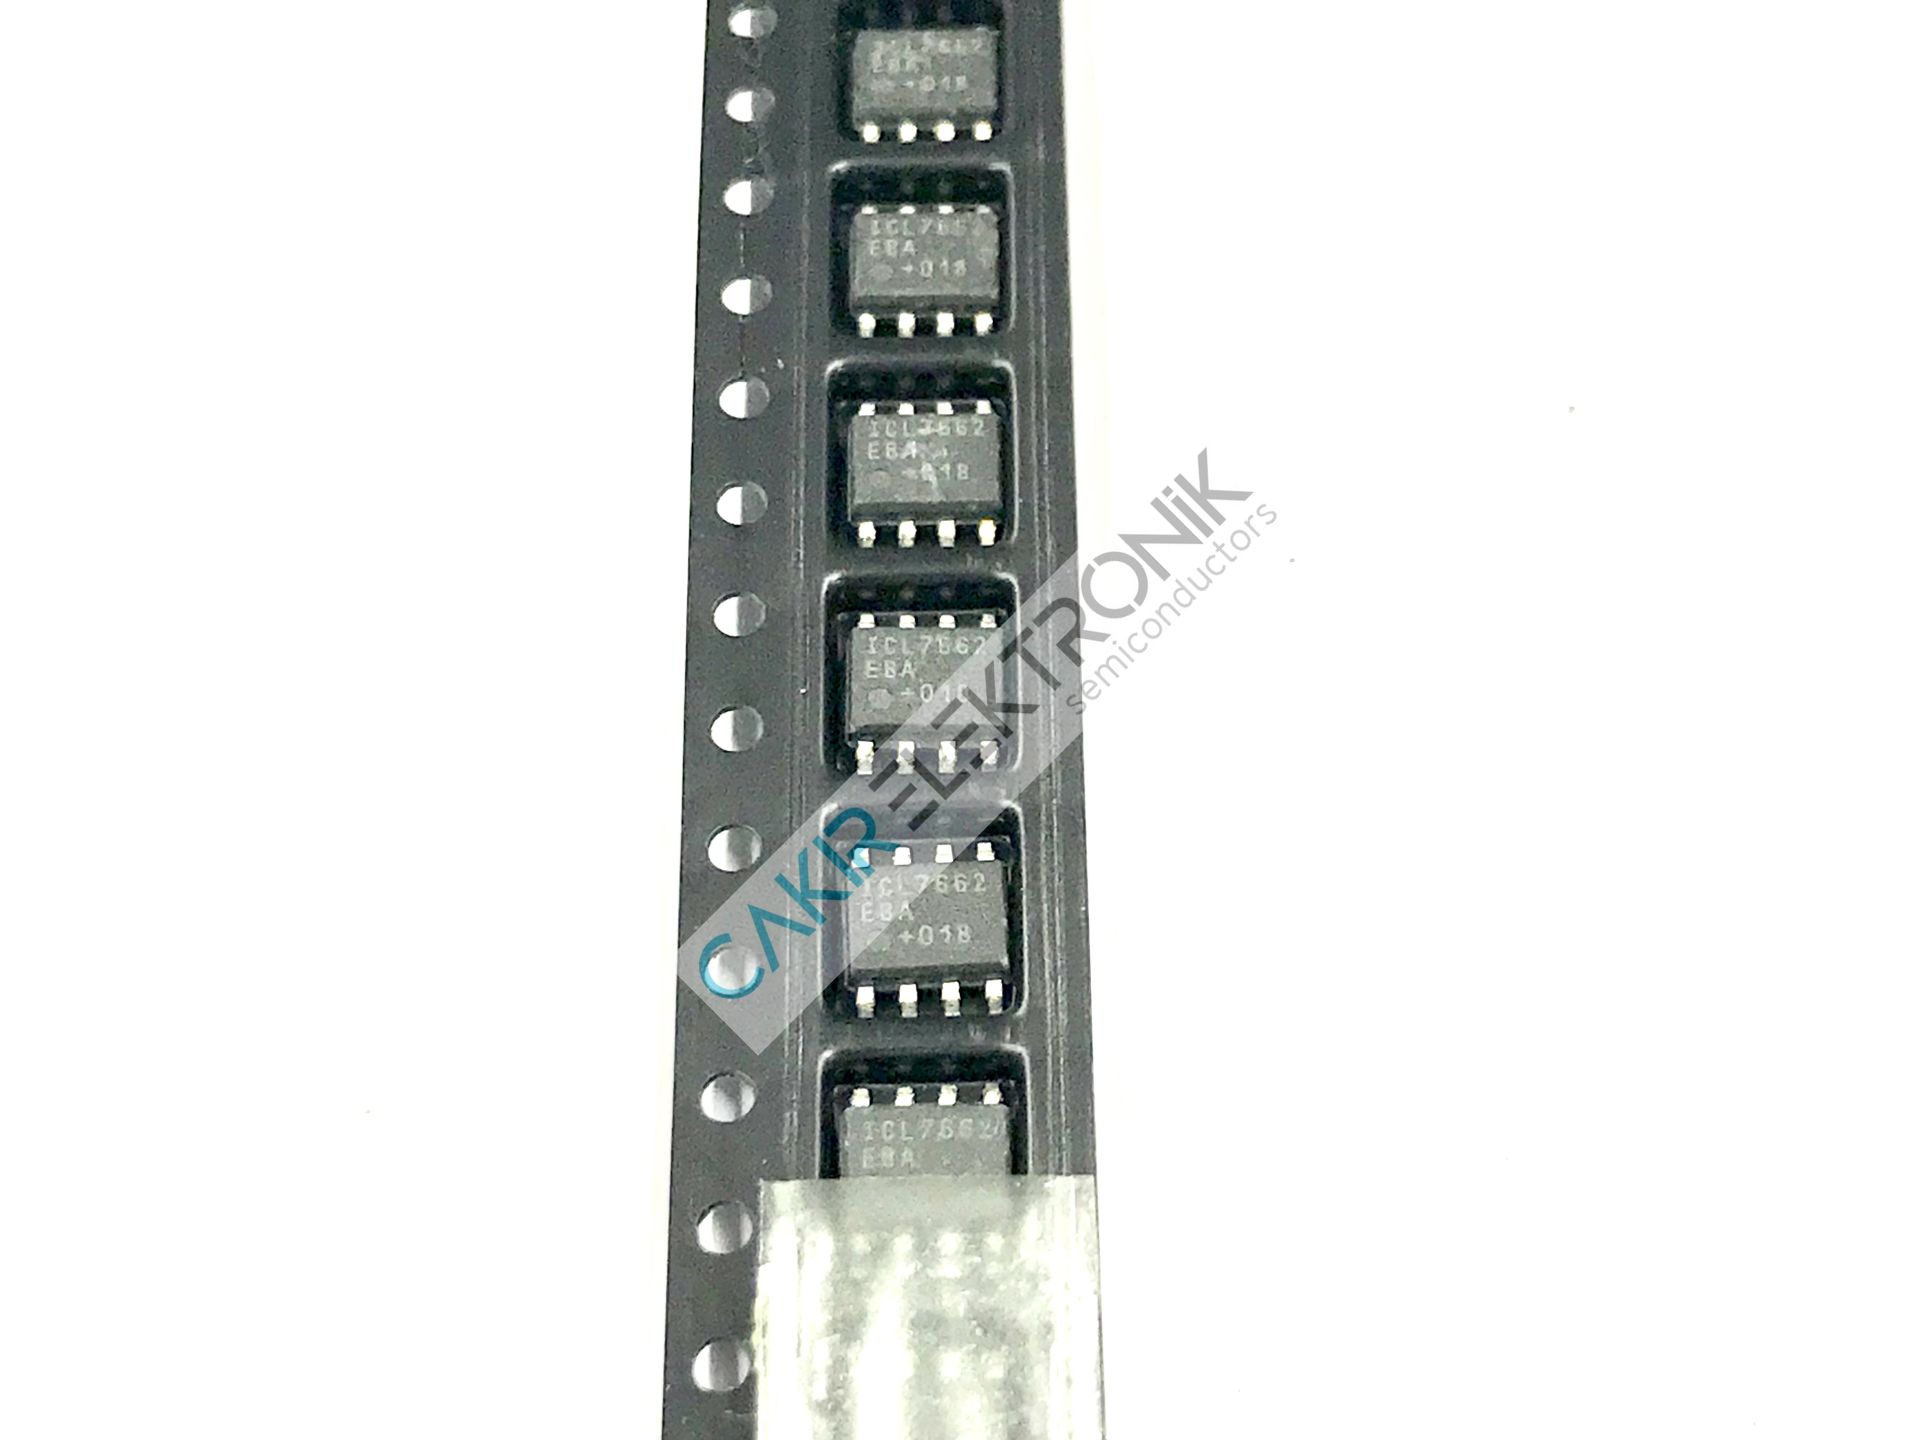 ICL7662 - ICL7662EBA - SOIC8 - CMOS VOLTAGE CONVERTERS